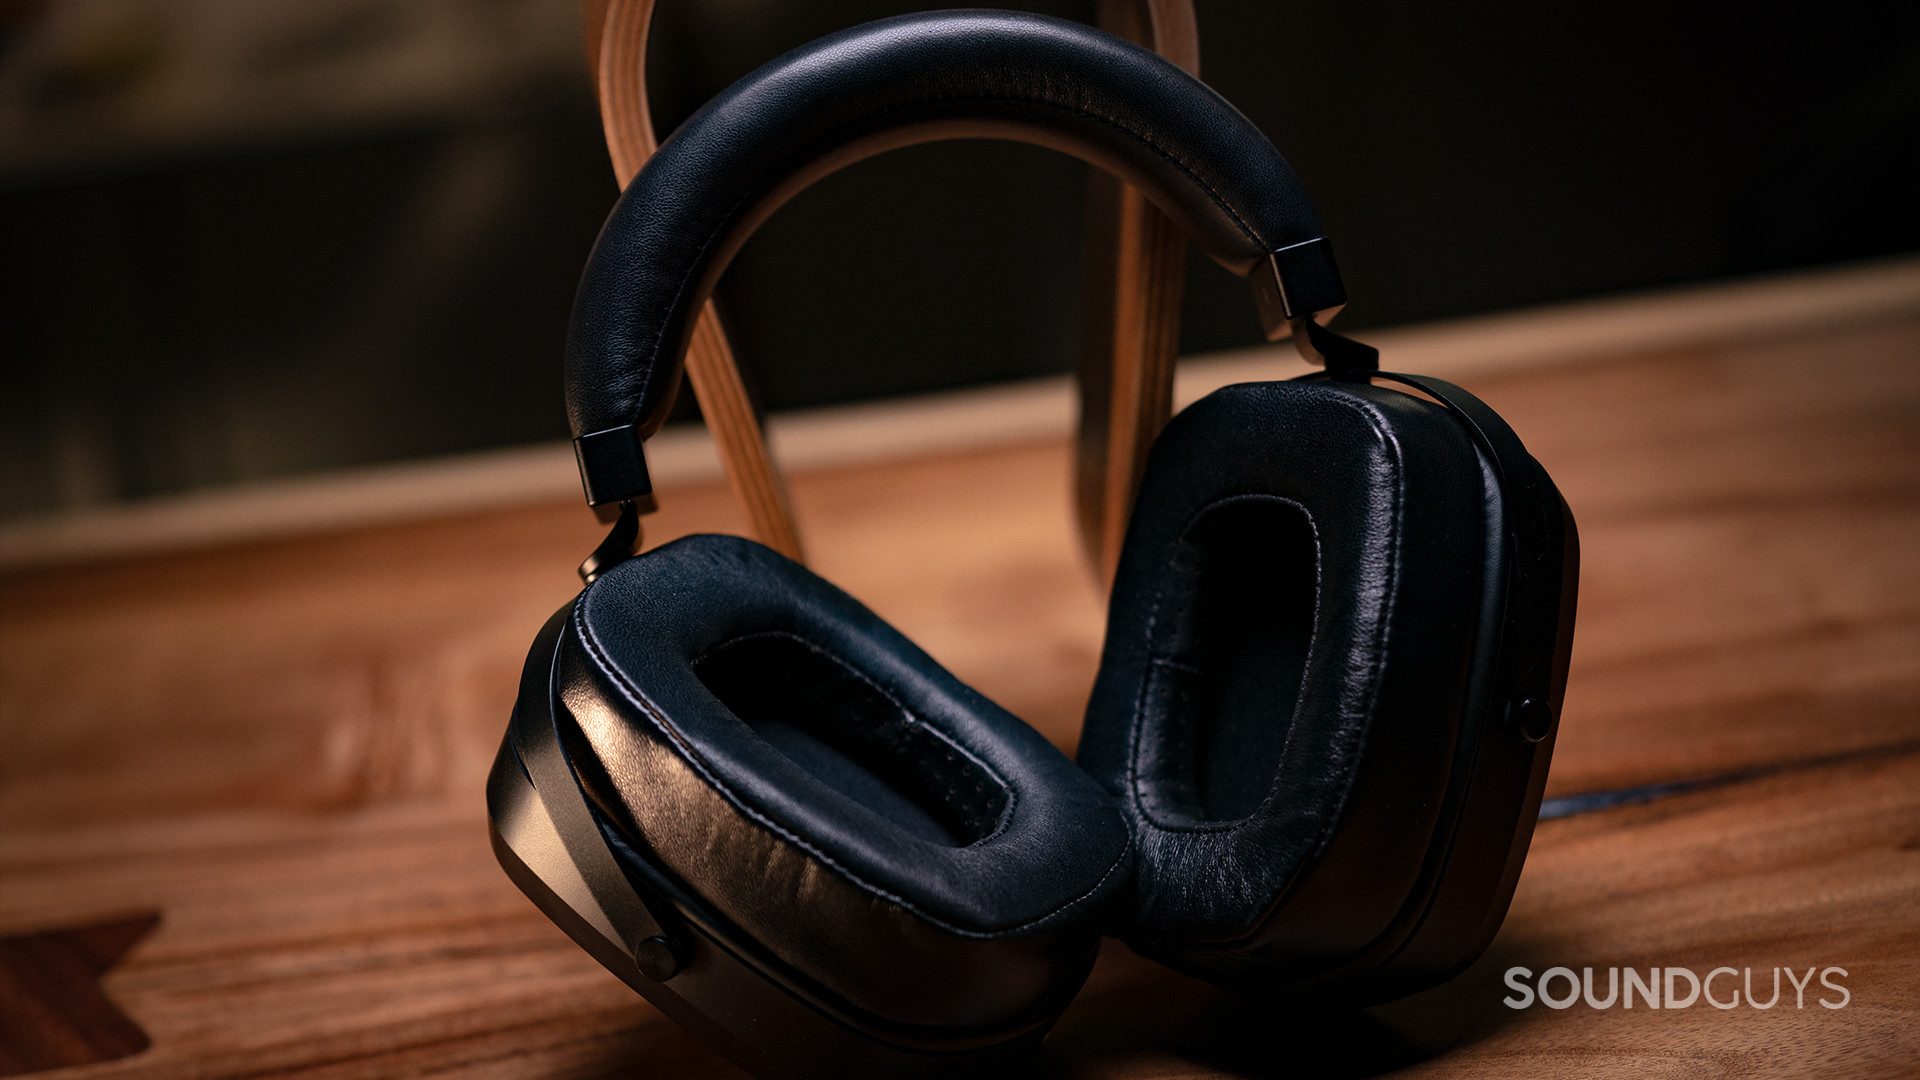 The thick leather padding on both the ear cups and band of the Monoprice Monolith AMT.